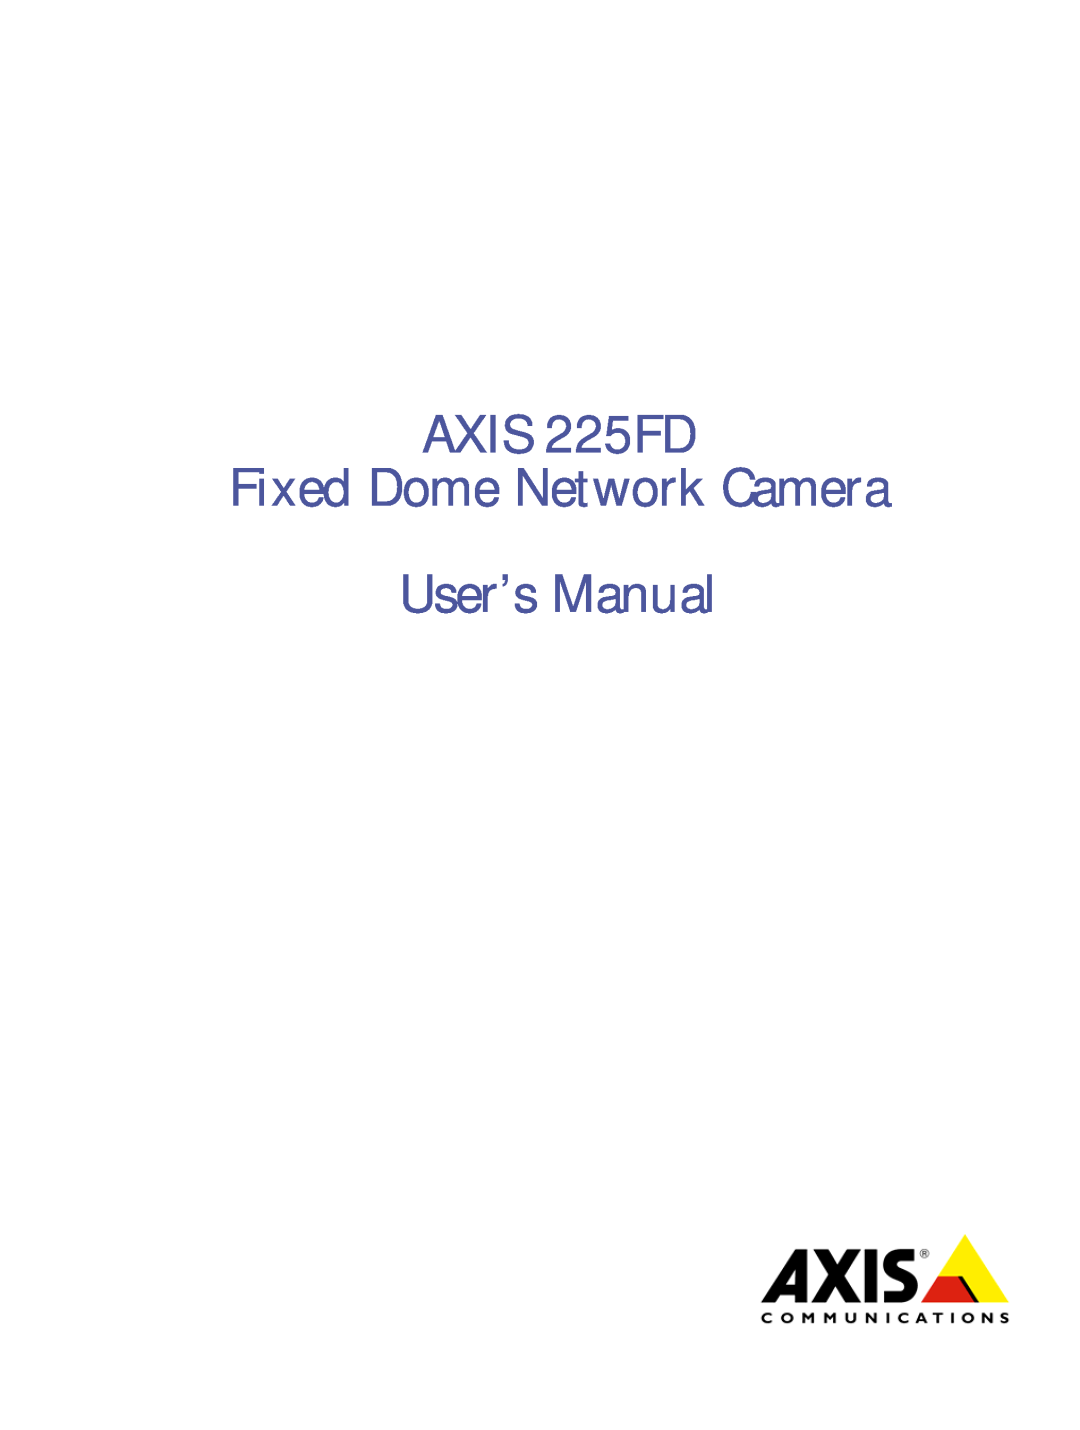 Axis Communications user manual AXIS 225FD Fixed Dome Network Camera User’s Manual 